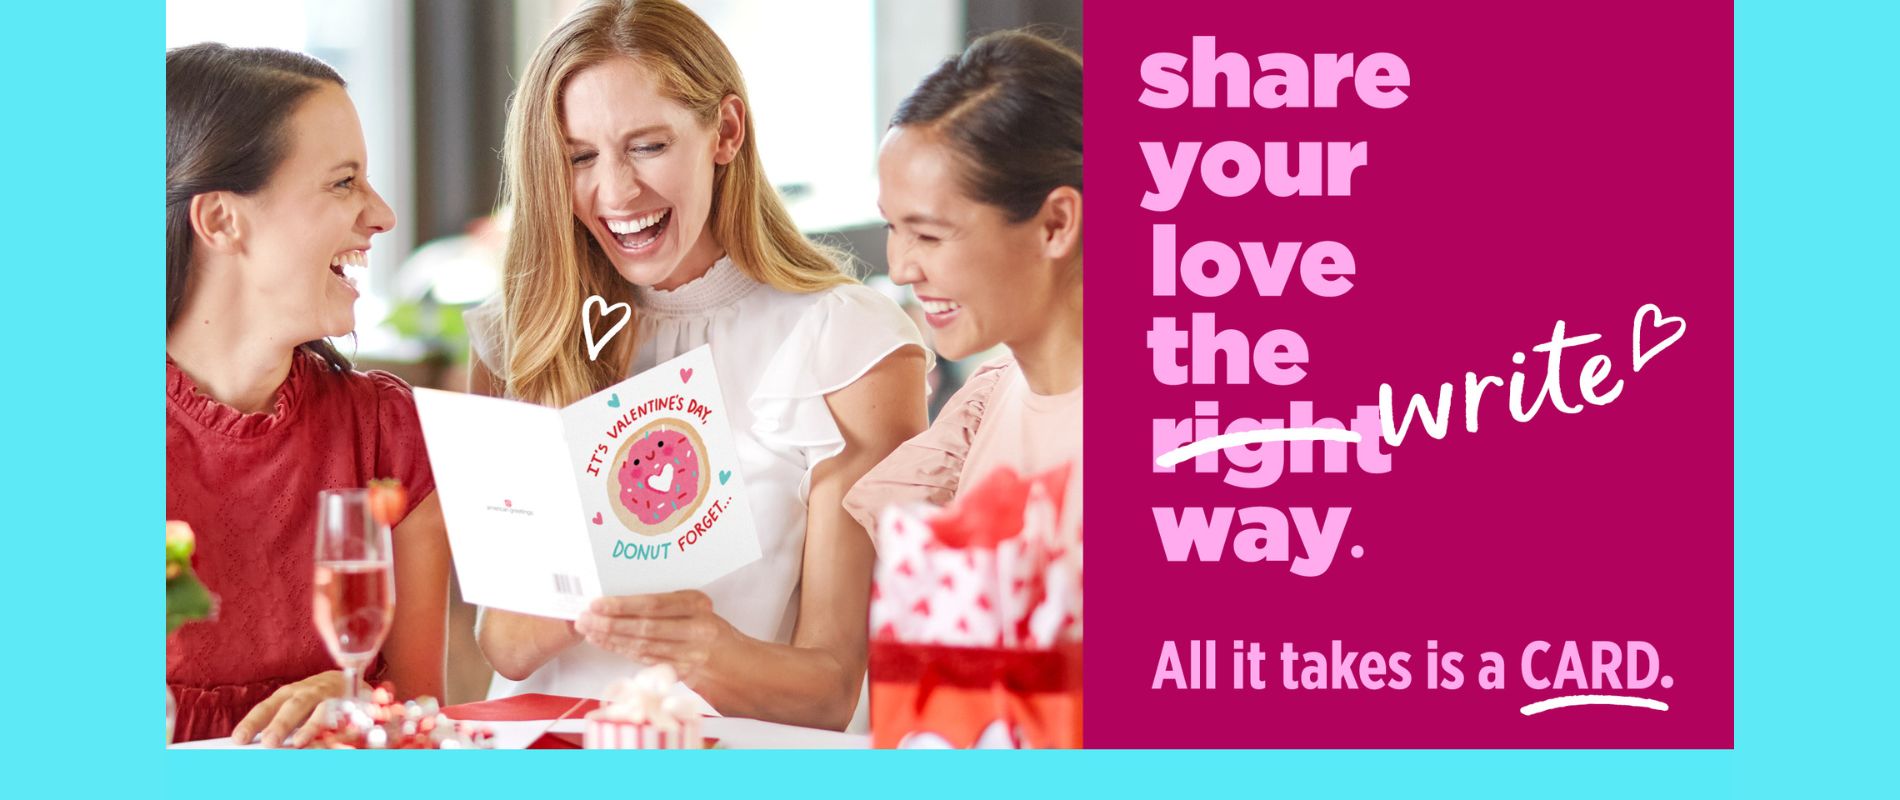 Share your love the write way with American Greetings